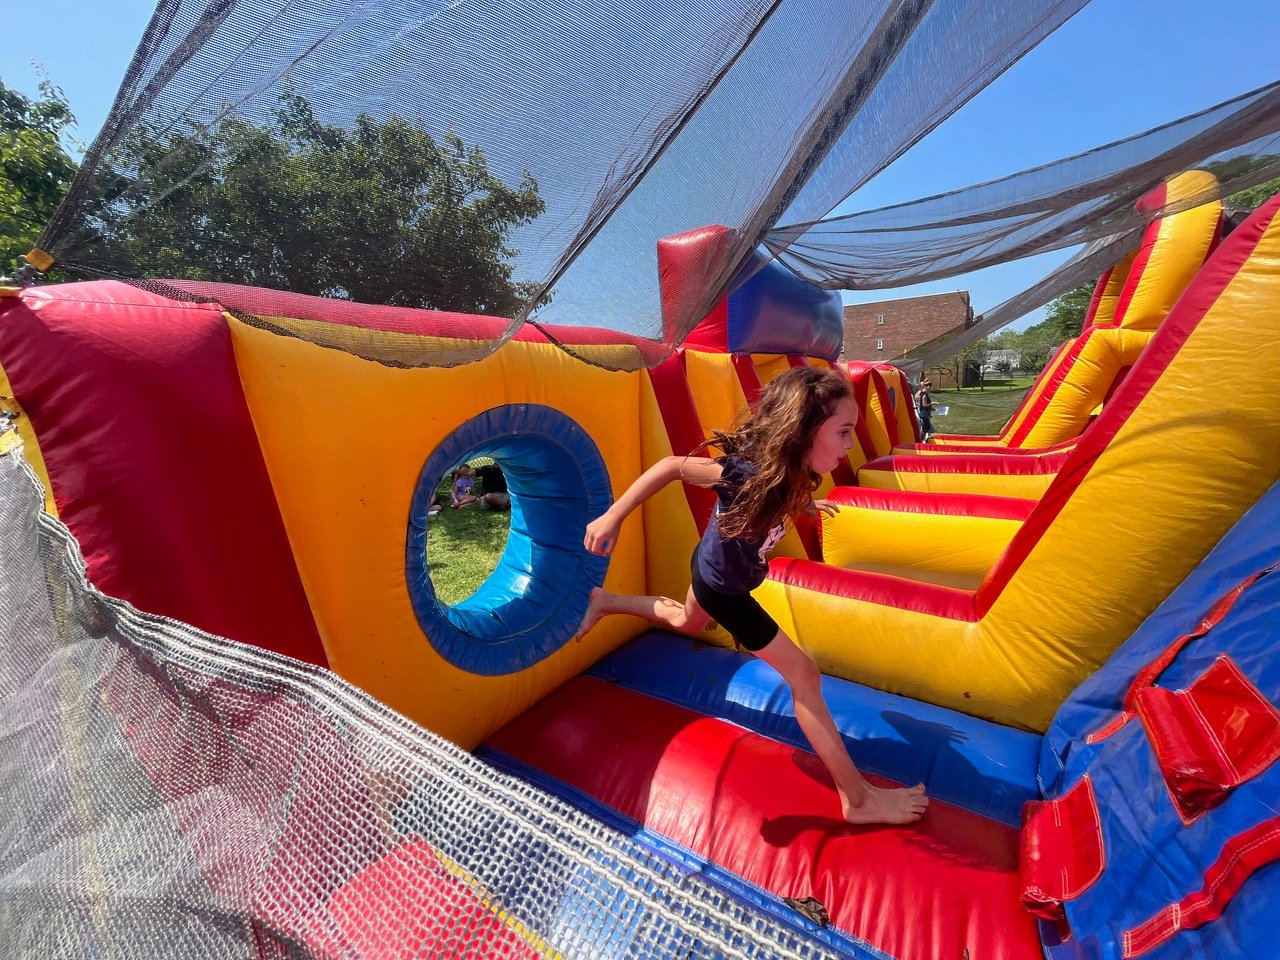 Third grade student Penelope Milillo ran her way through the bouncy obstacle course at Summer Jam.